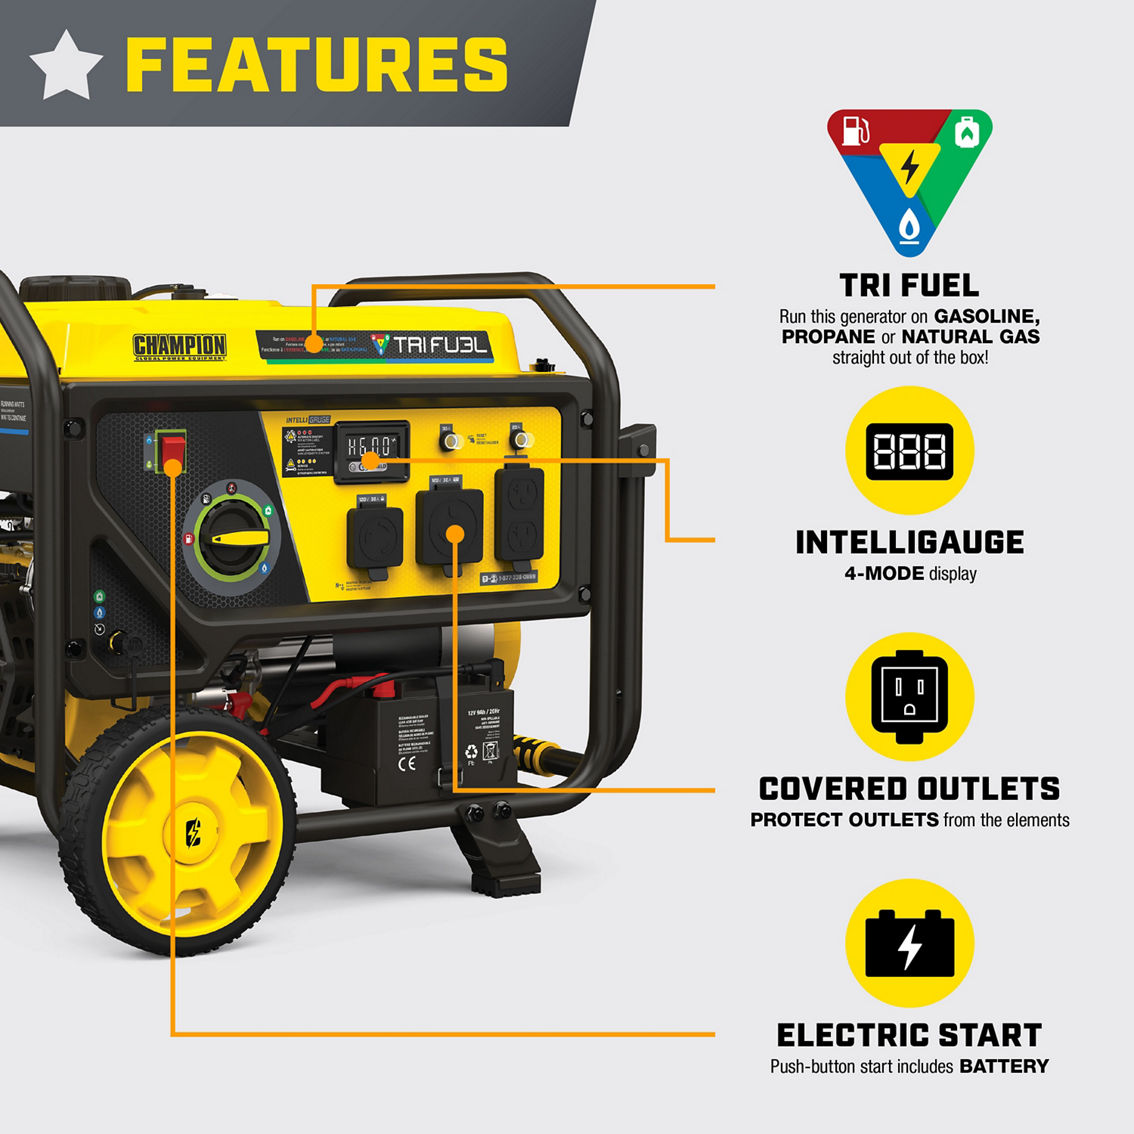 Champion 4000-Watt Tri Fuel Portable Natural Gas Generator with Electric Start - Image 8 of 10